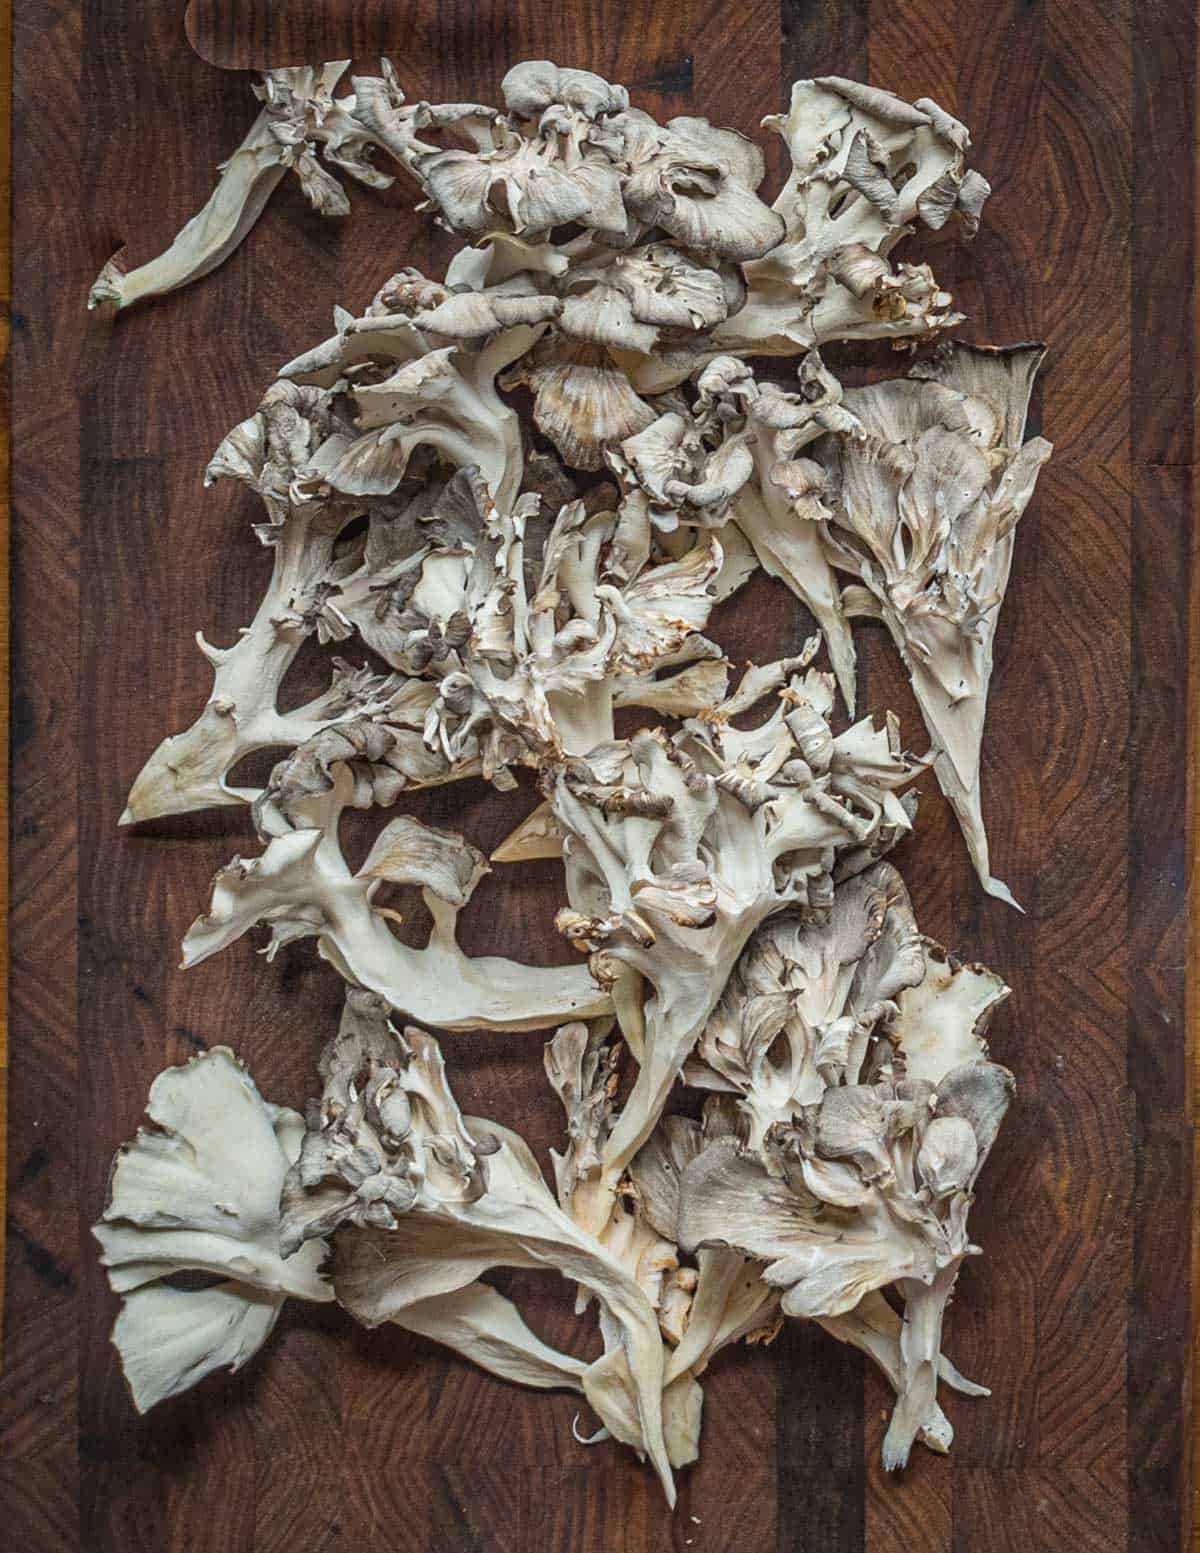 Pieces of mushroom pulled apart on a cutting board.